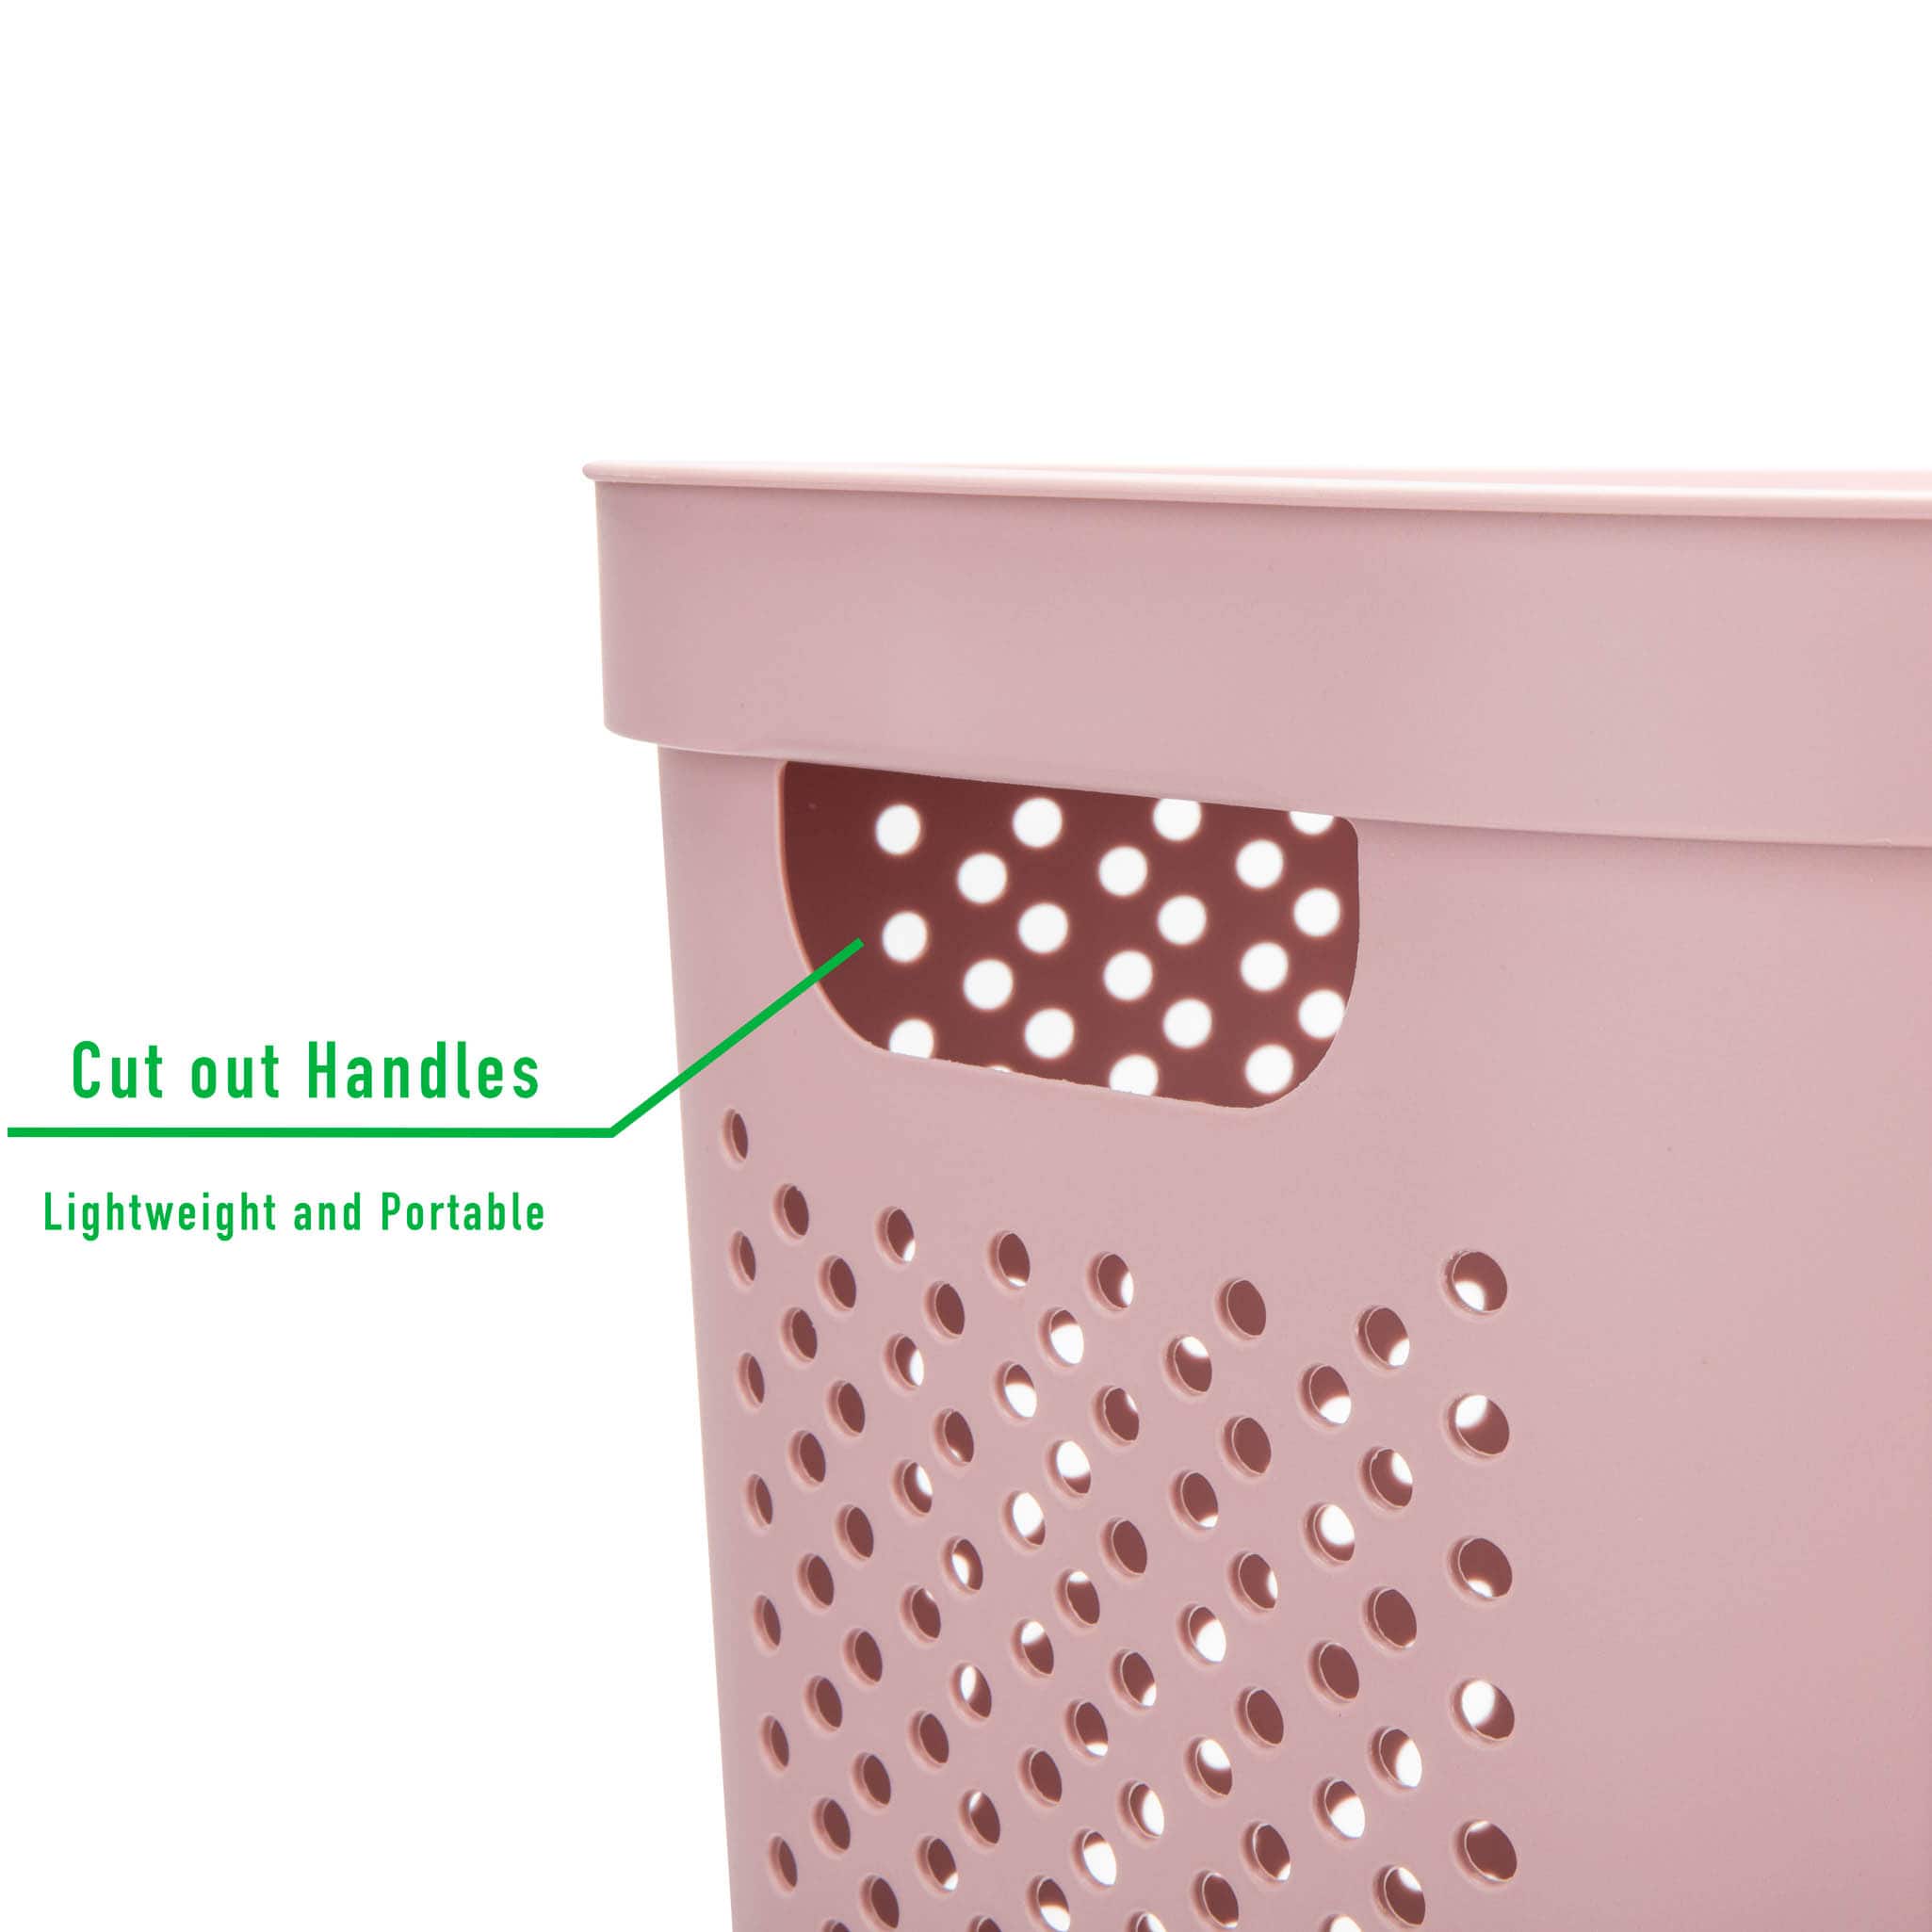 Mind Reader 60L Perforated Plastic Laundry Hamper with Lid